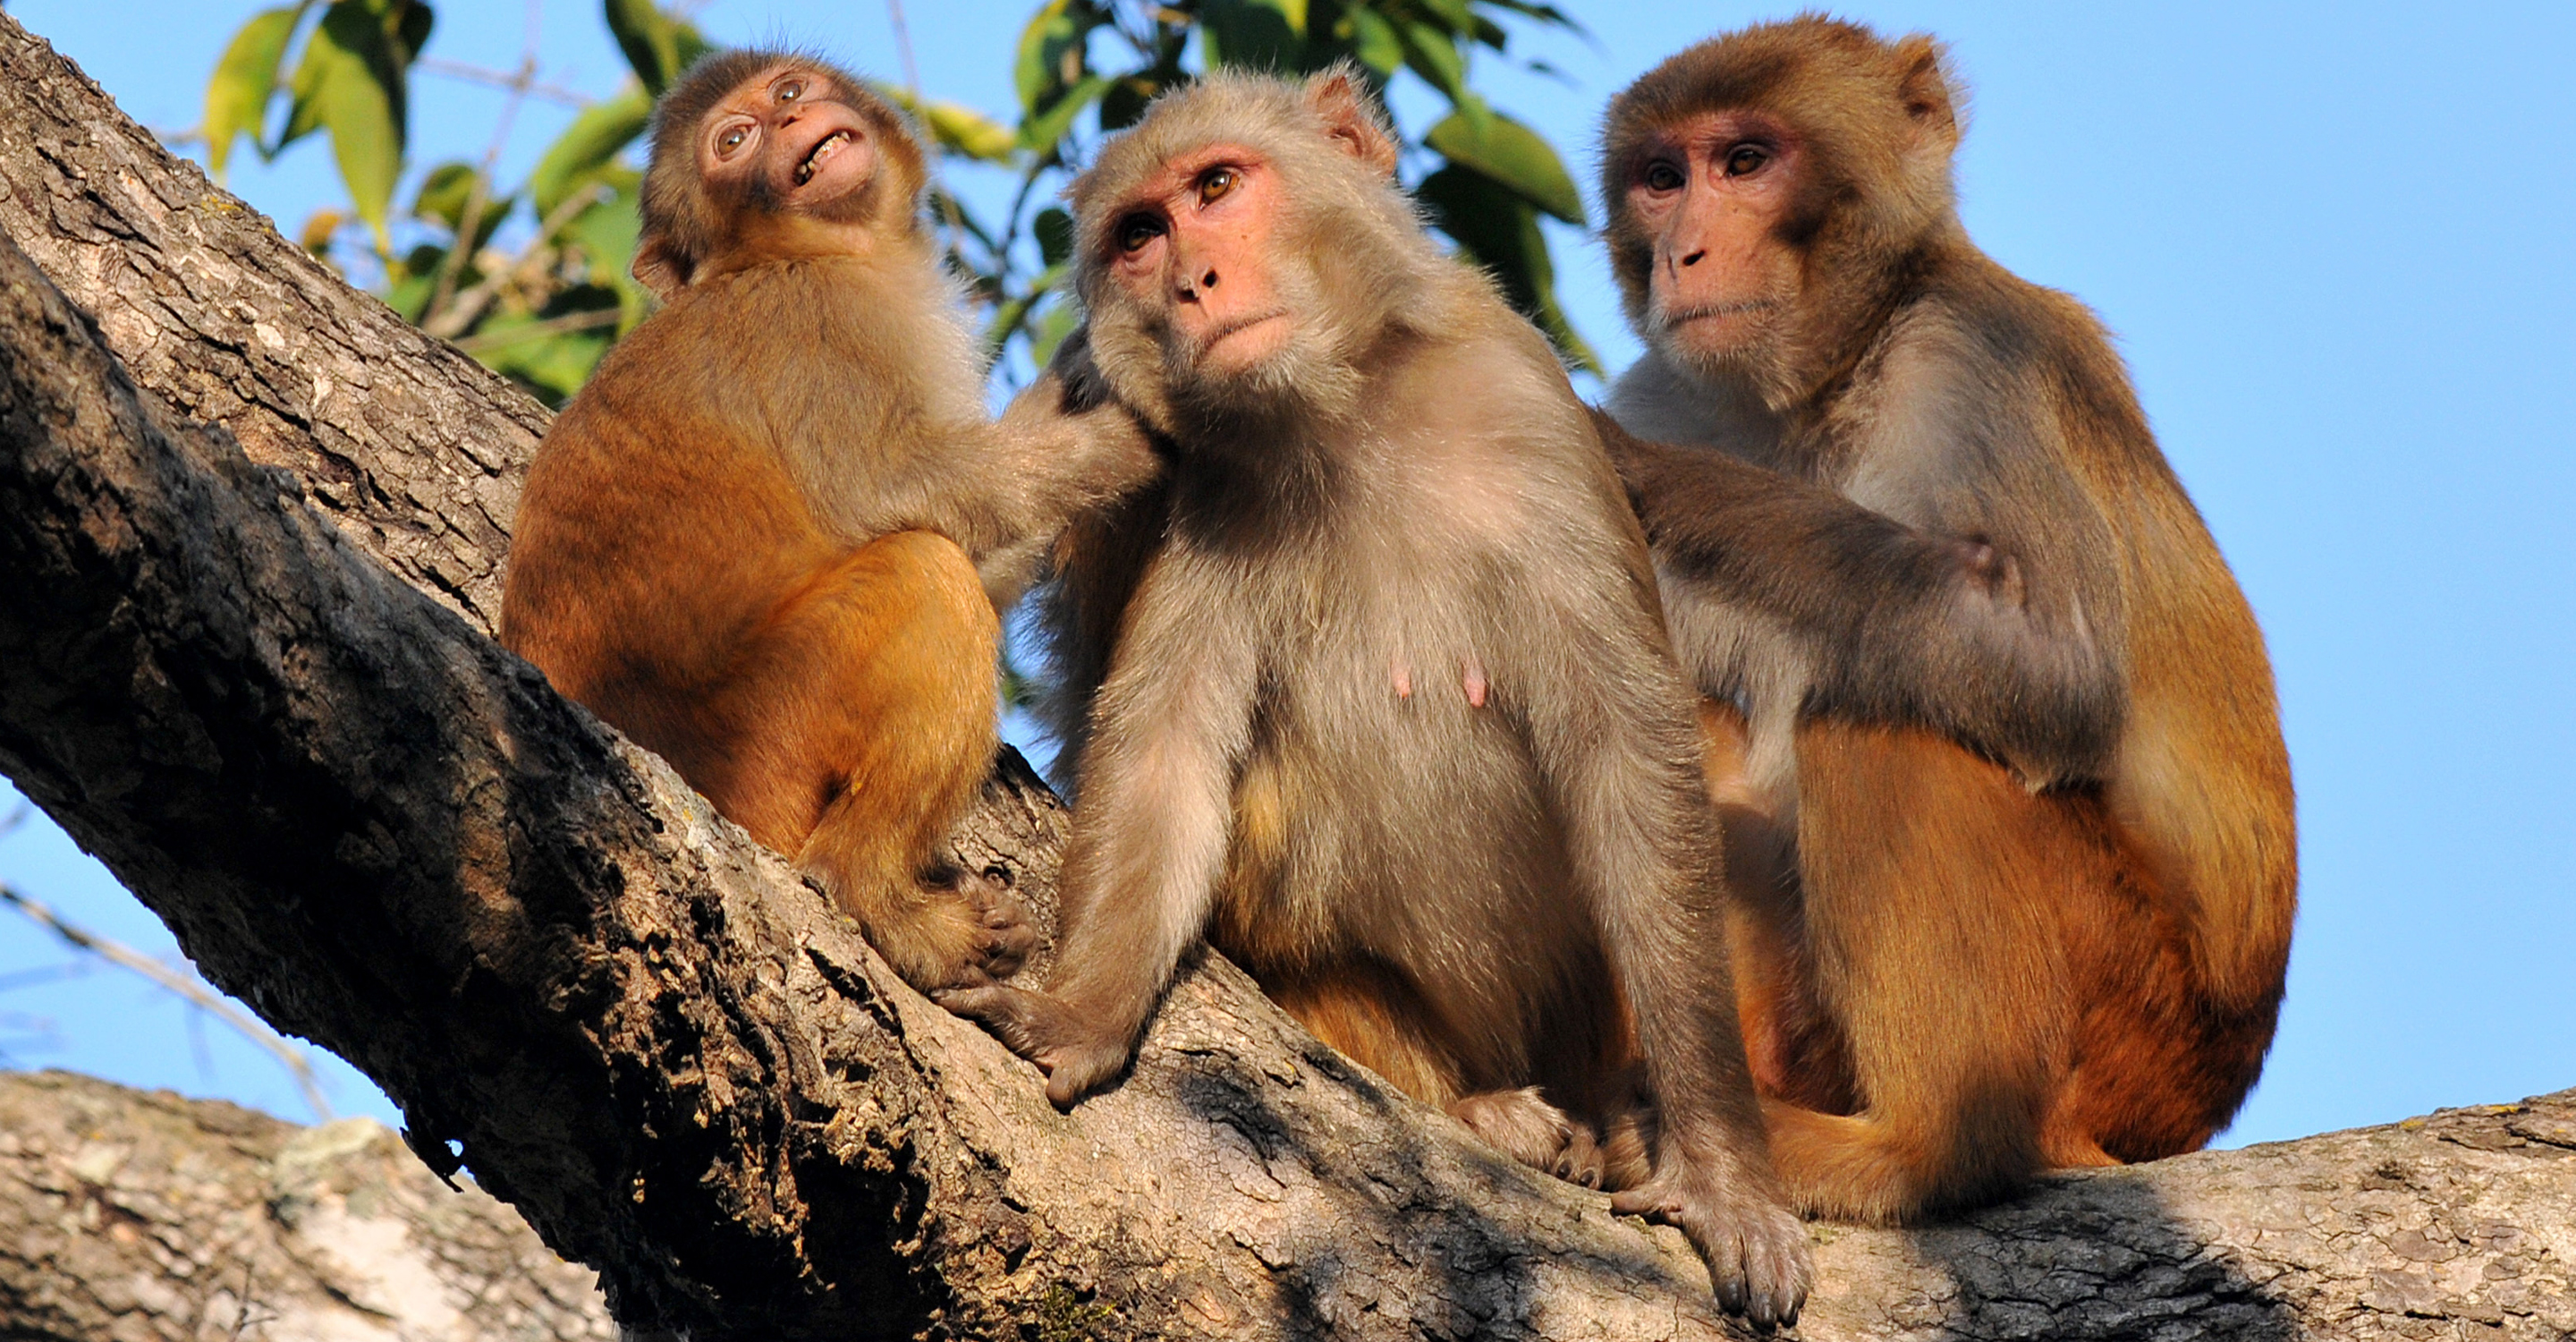 Three rhesus monkeys sit together on a tree branch in Kanha National Park, India